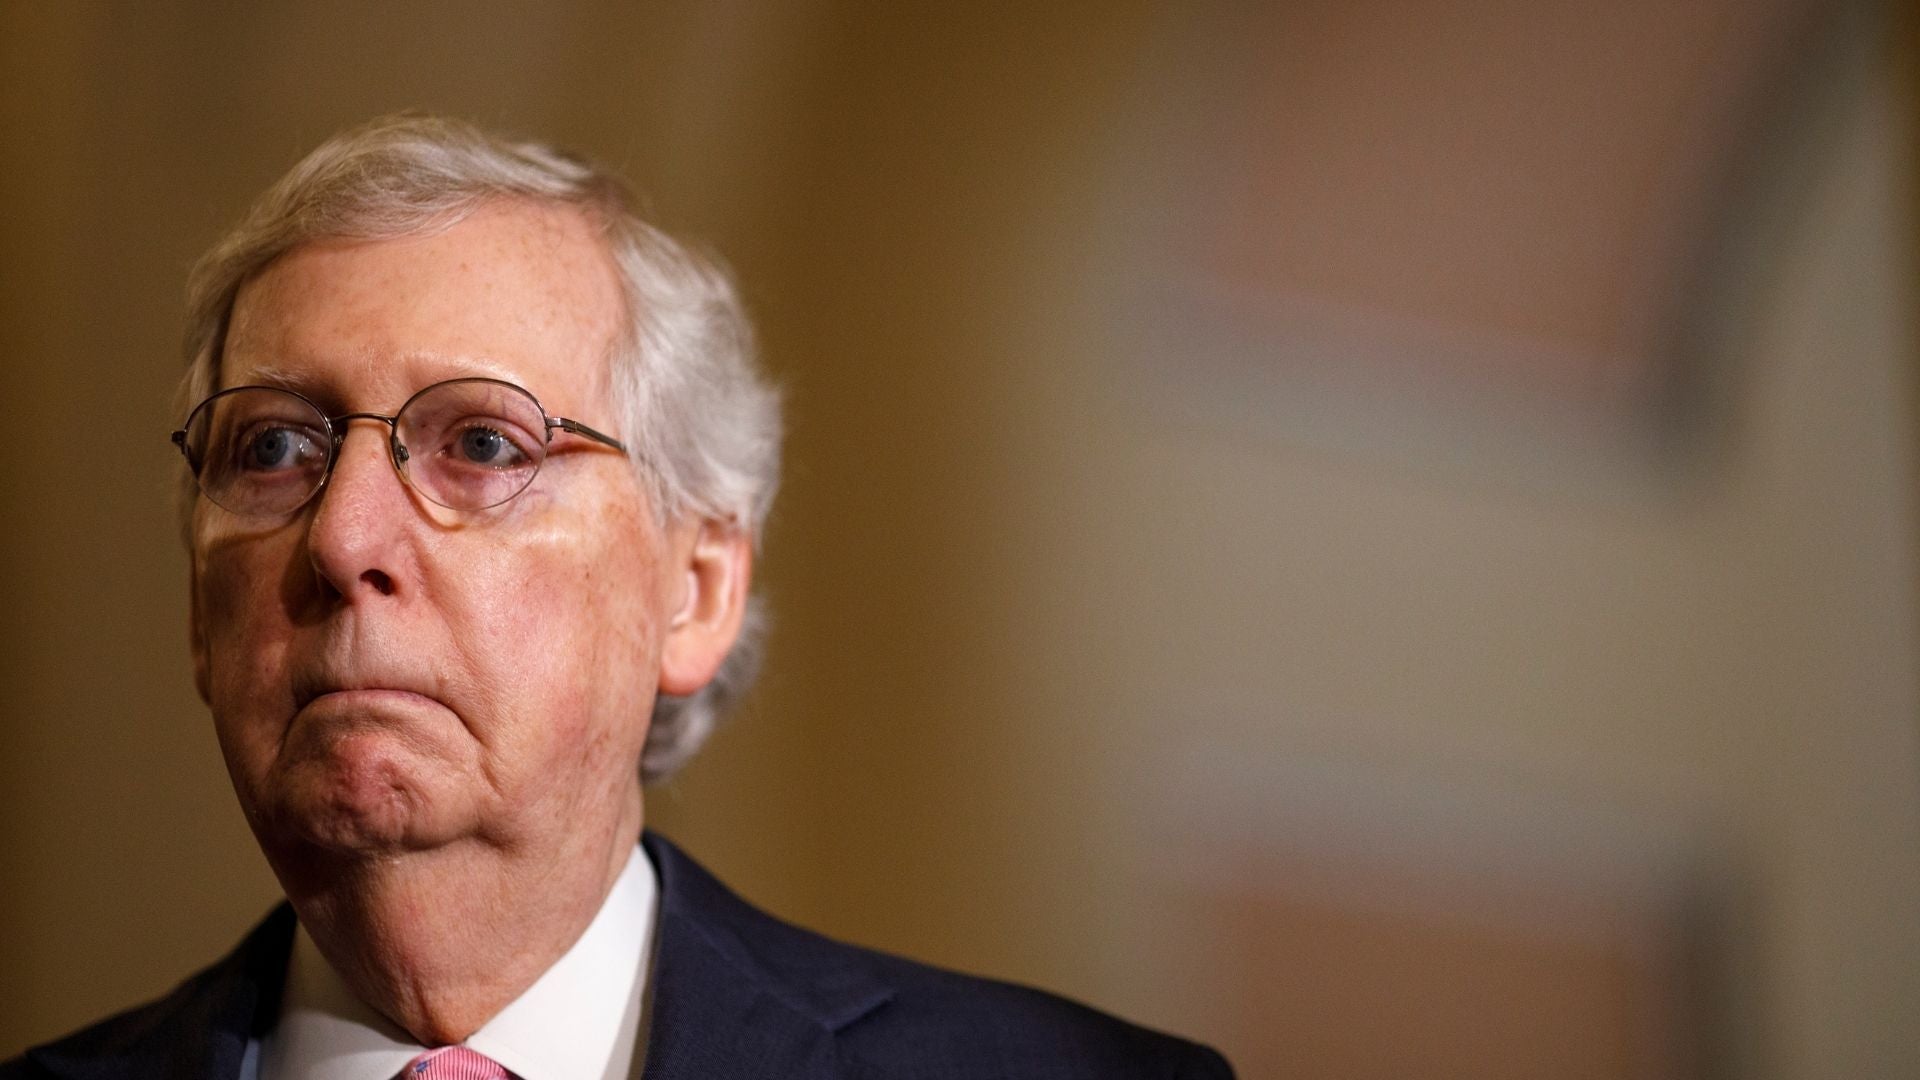 Mitch McConnell is proof turtles can do anything if they put their minds to it. (Photo: Tom Brenner, Getty Images)